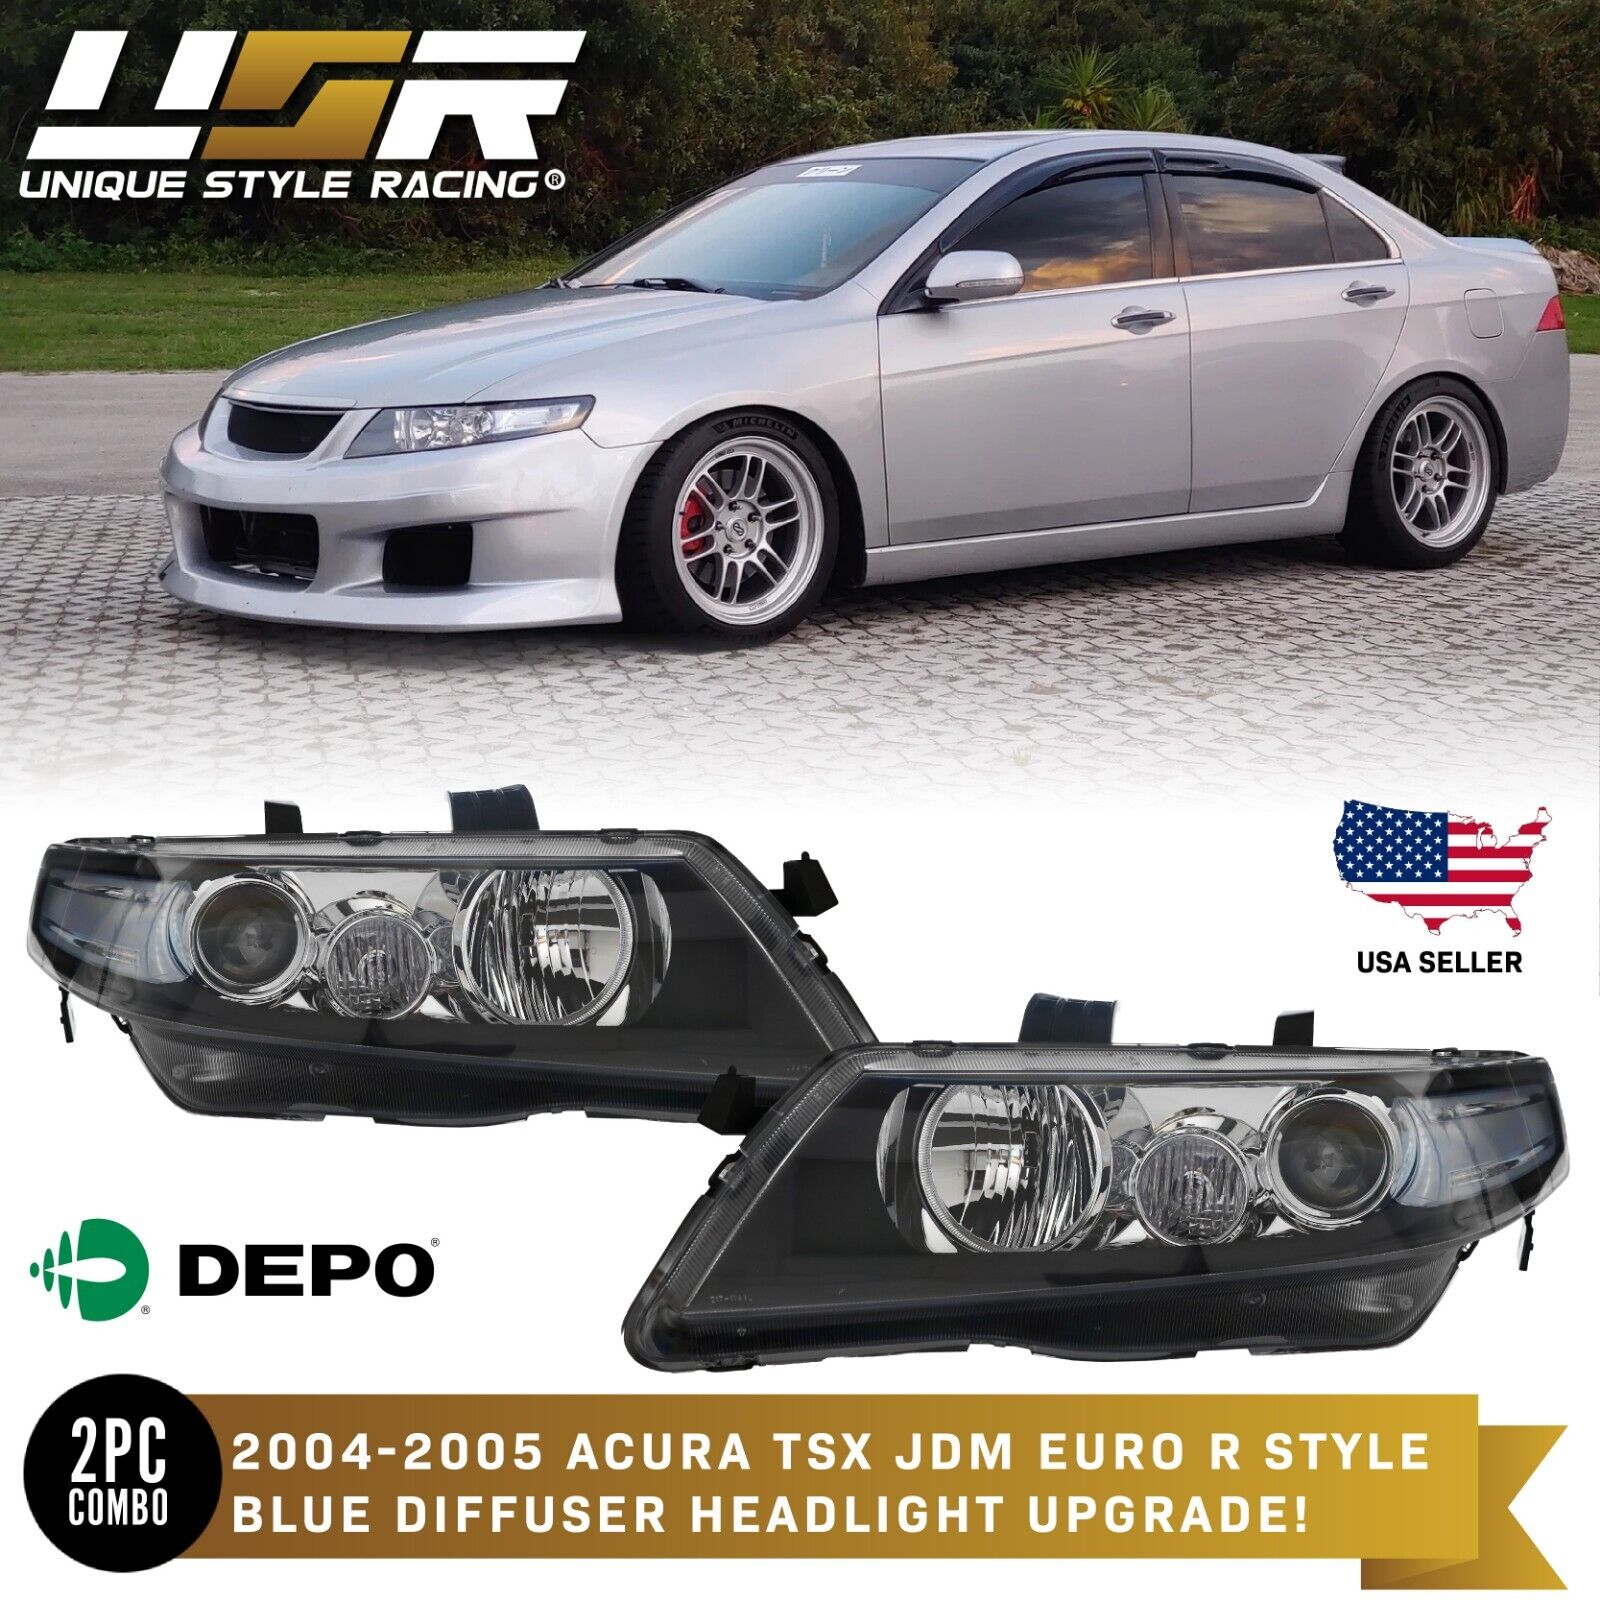 DEPO Euro R CL7 JDM Headlights Blue / Clear Lens Fit 2004-2005 Acura TSX